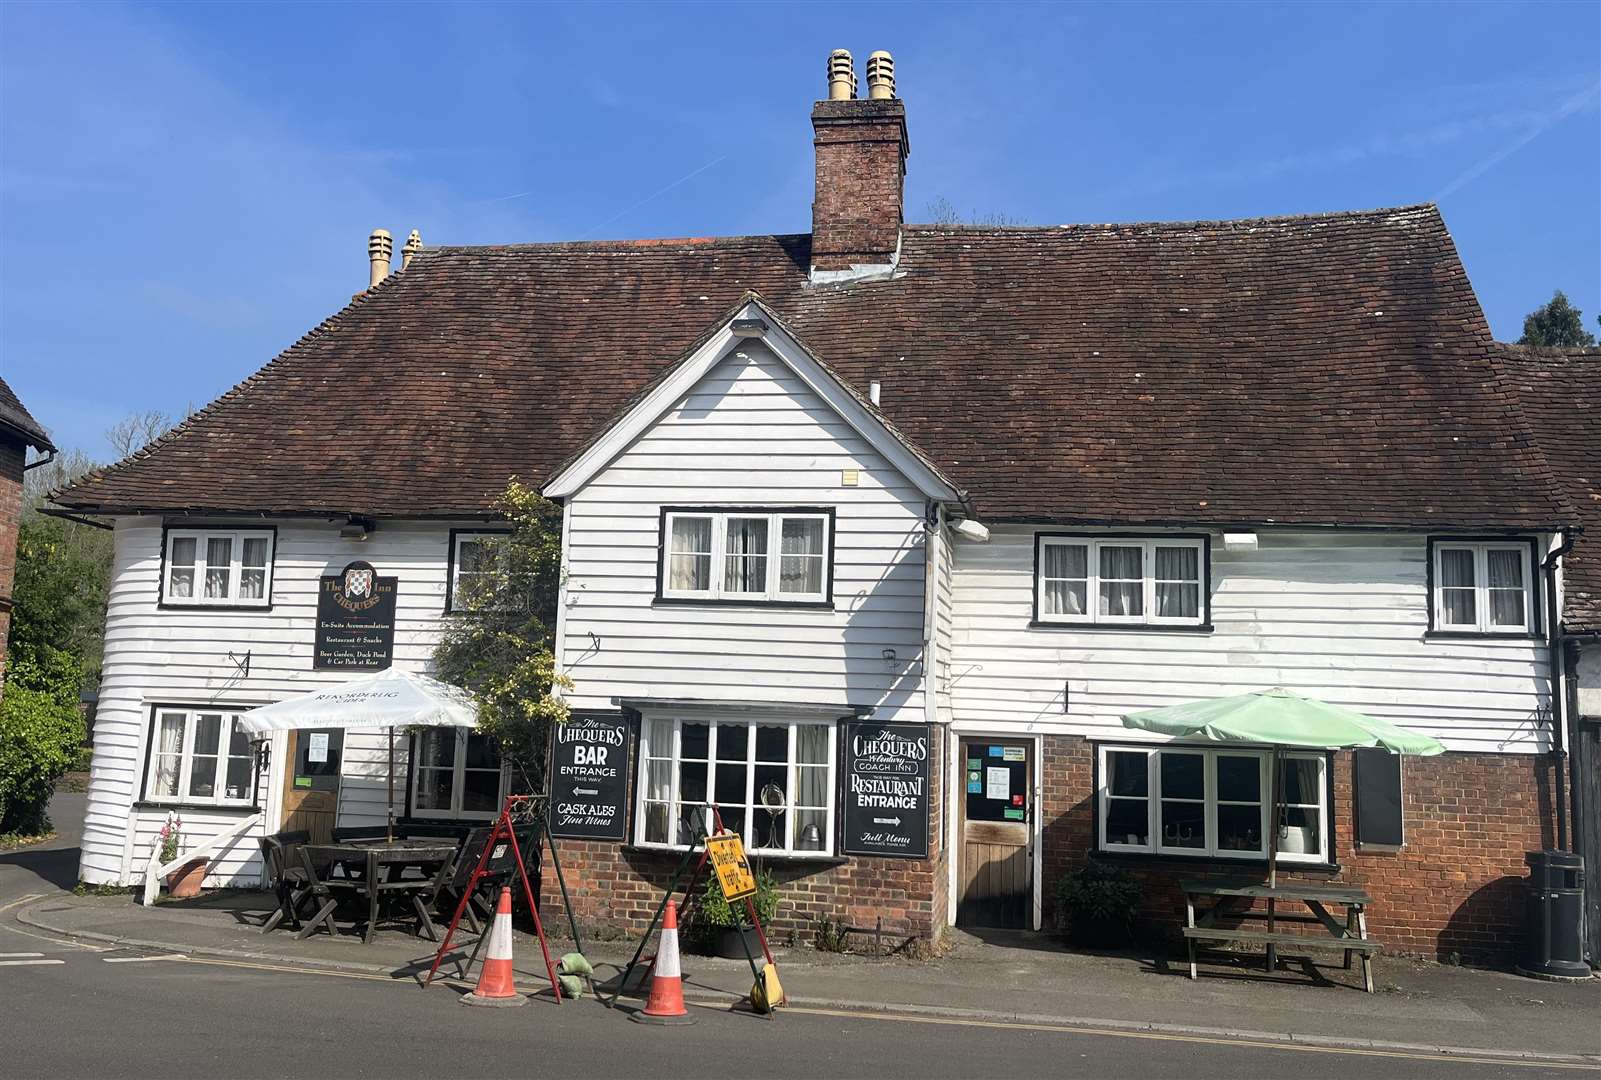 The Chequers Inn in Smarden dates back 600 years - but the Spalding family says the business is no longer viable and want to turn it into a house